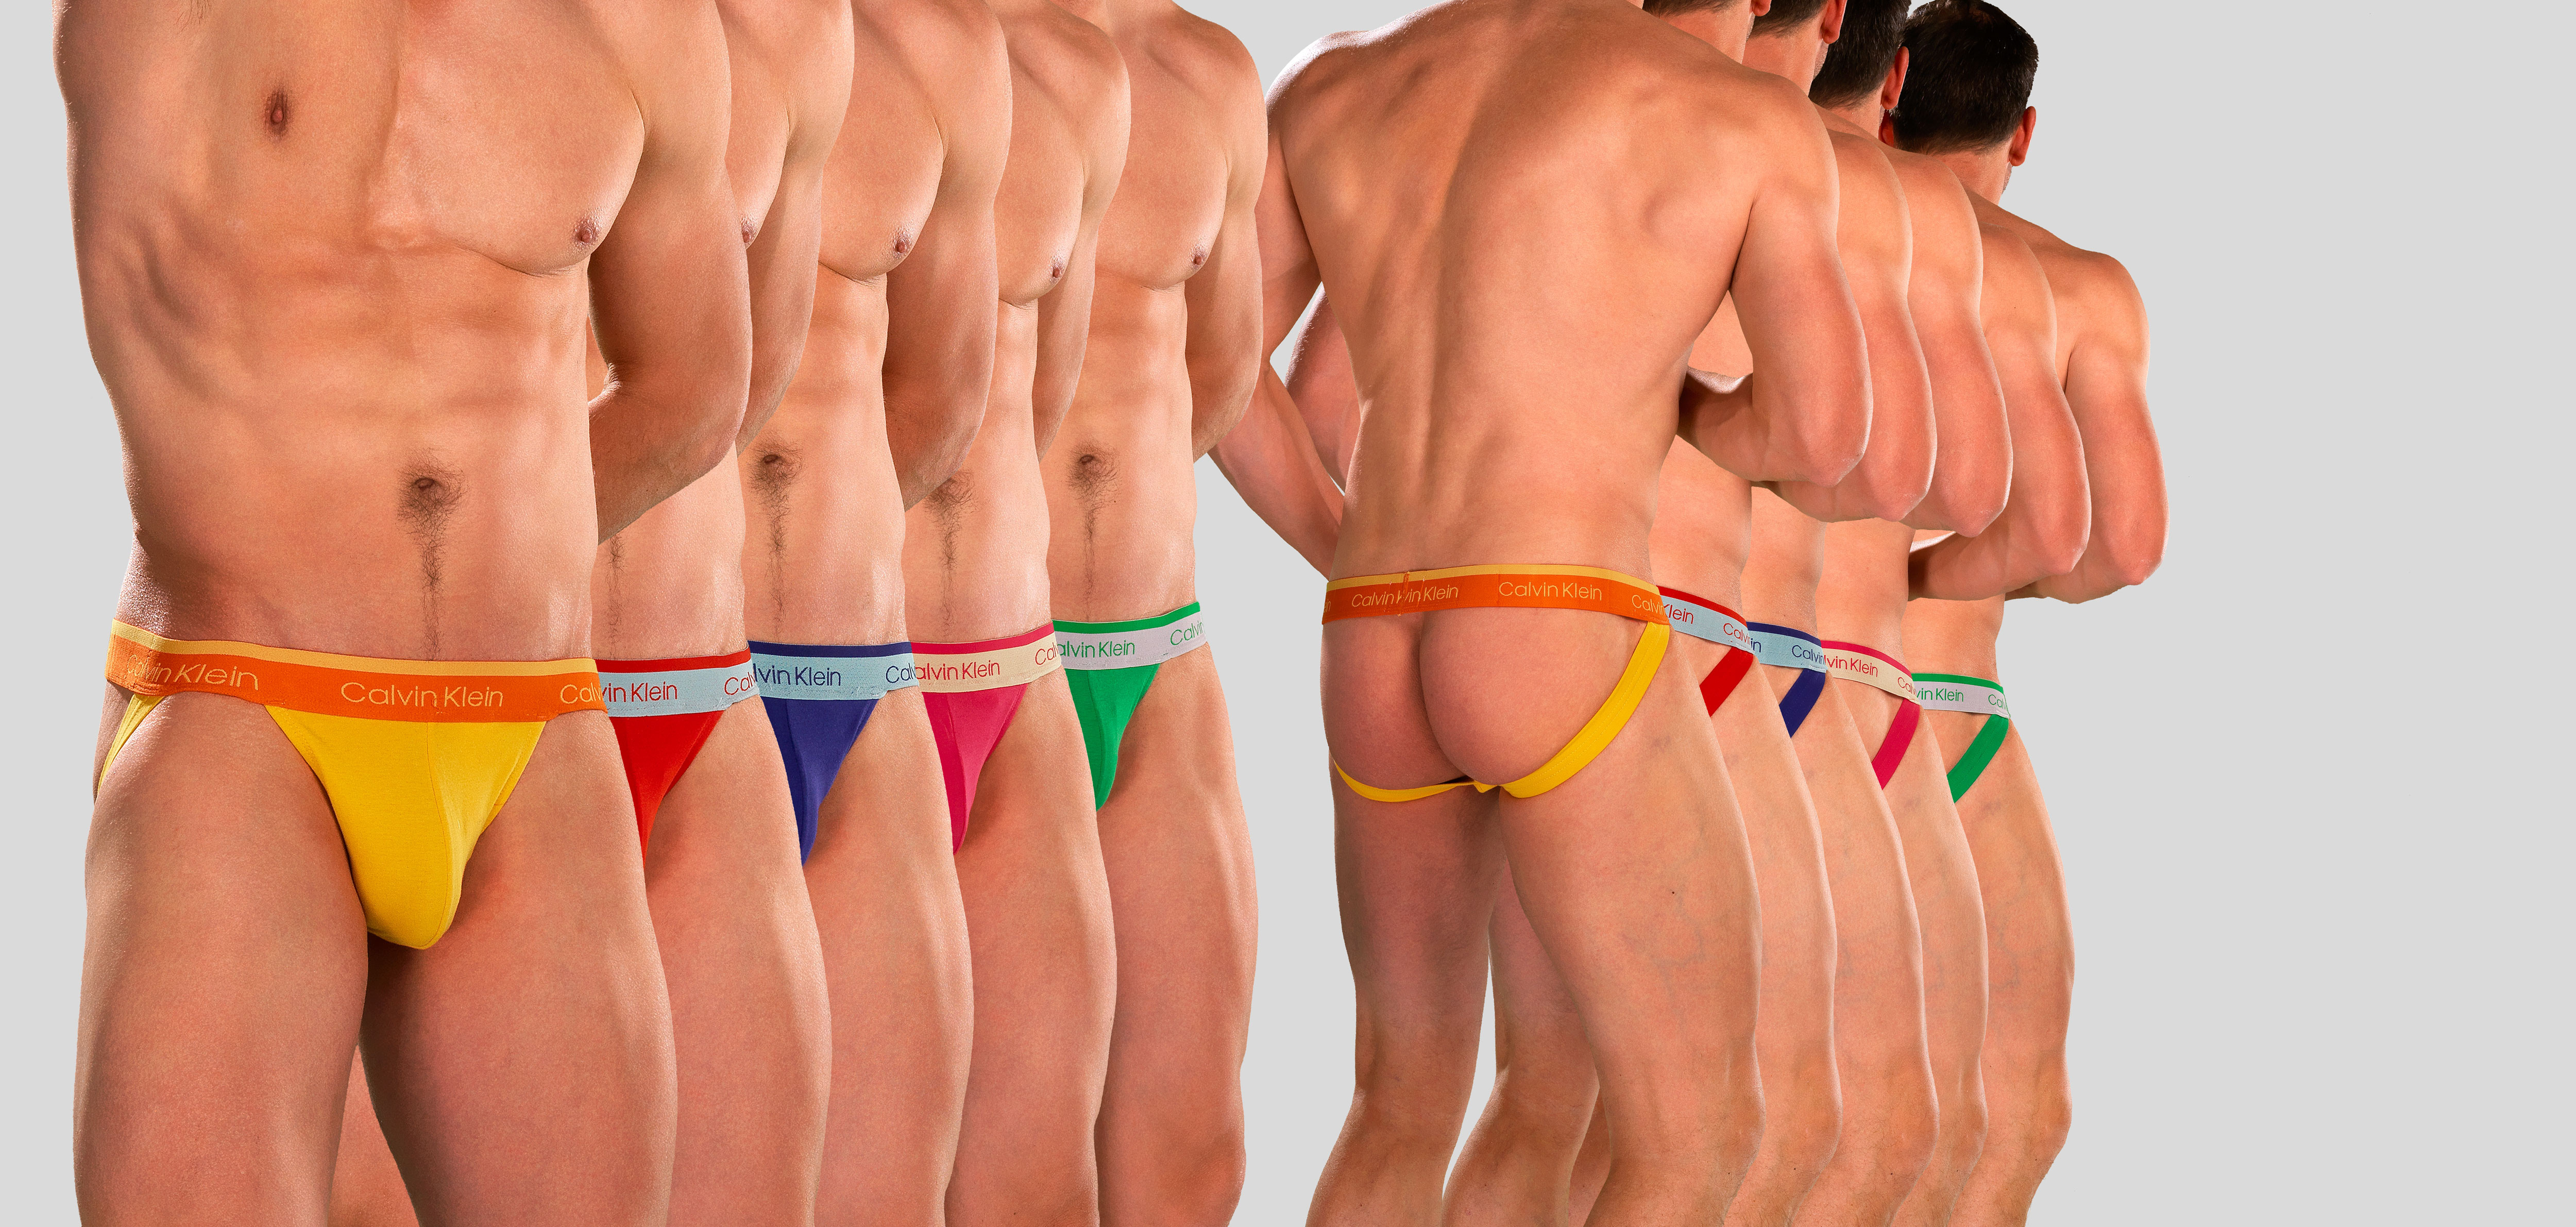 Calvin Klein The Pride Limited Edition Jockstrap 5-Pack NB2332A, color Nee